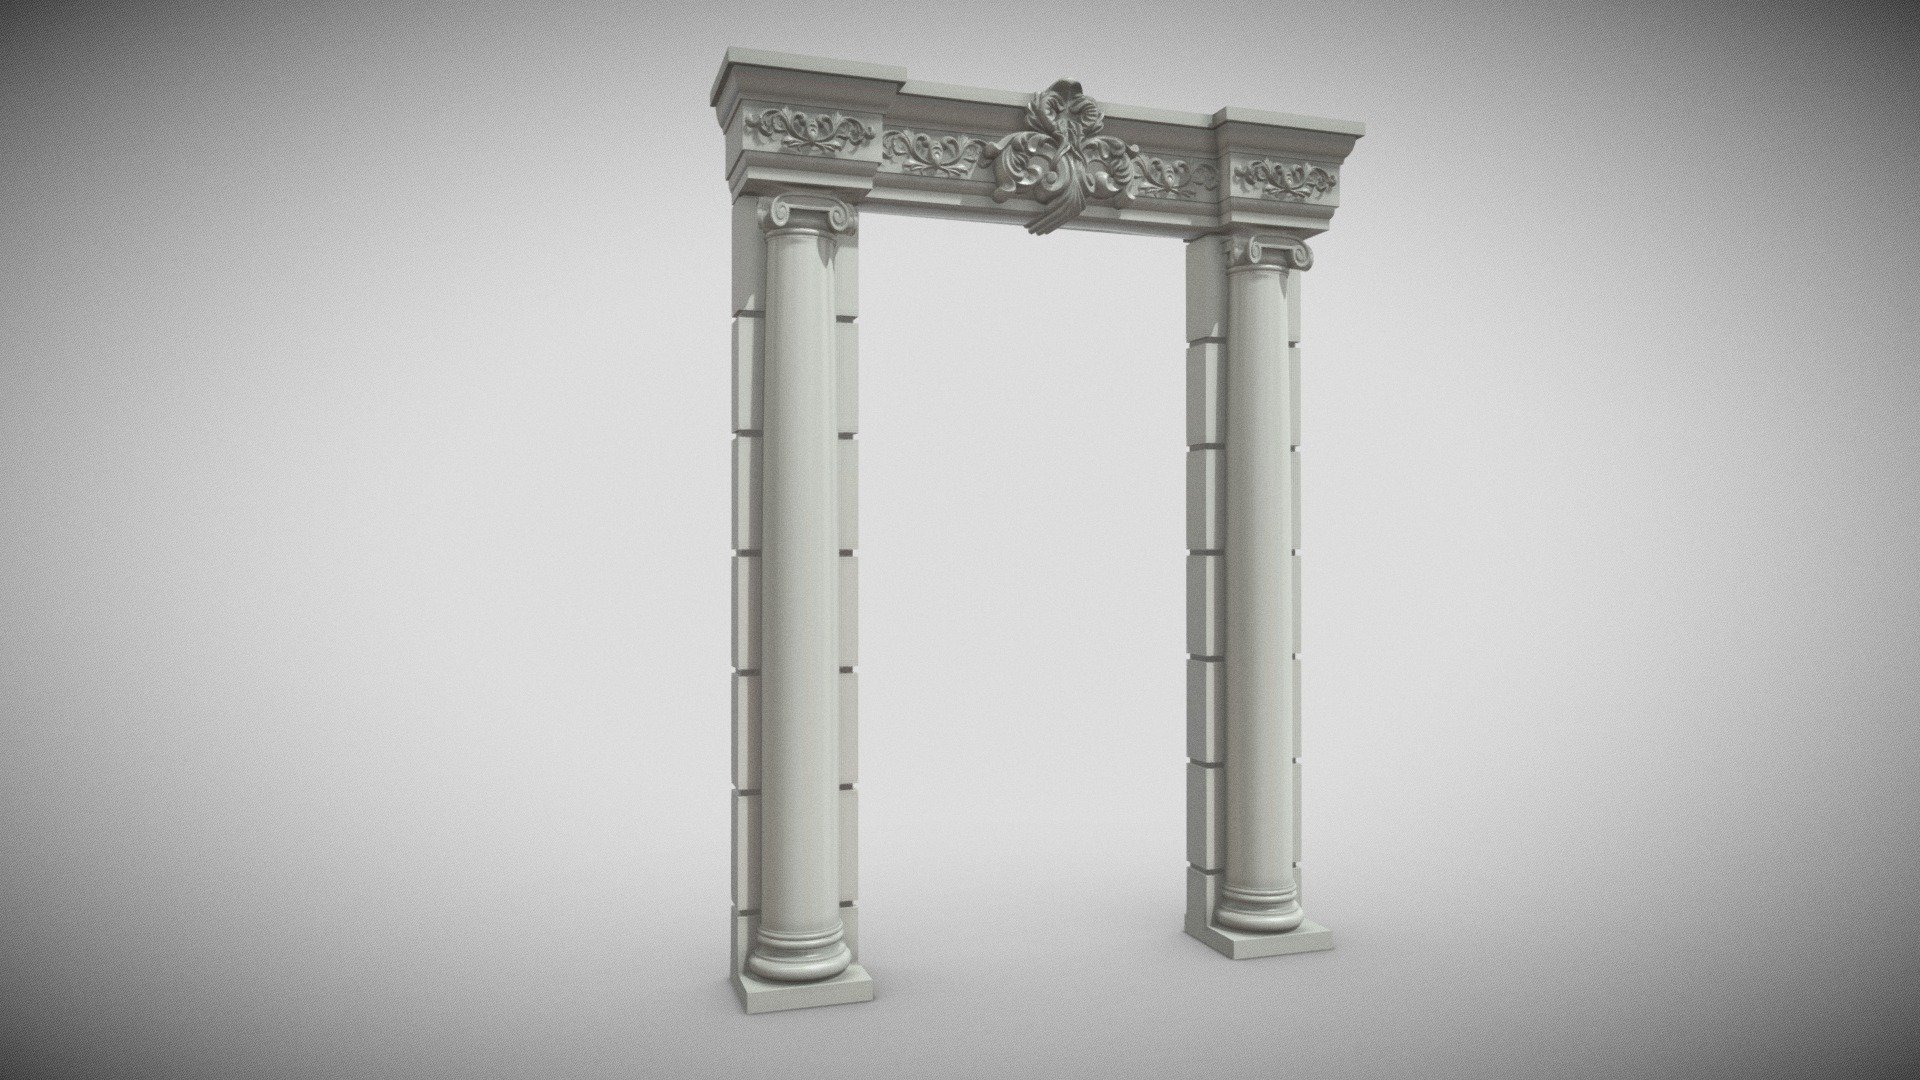 classic patterned door 03 may be necessary for your projects 3d model